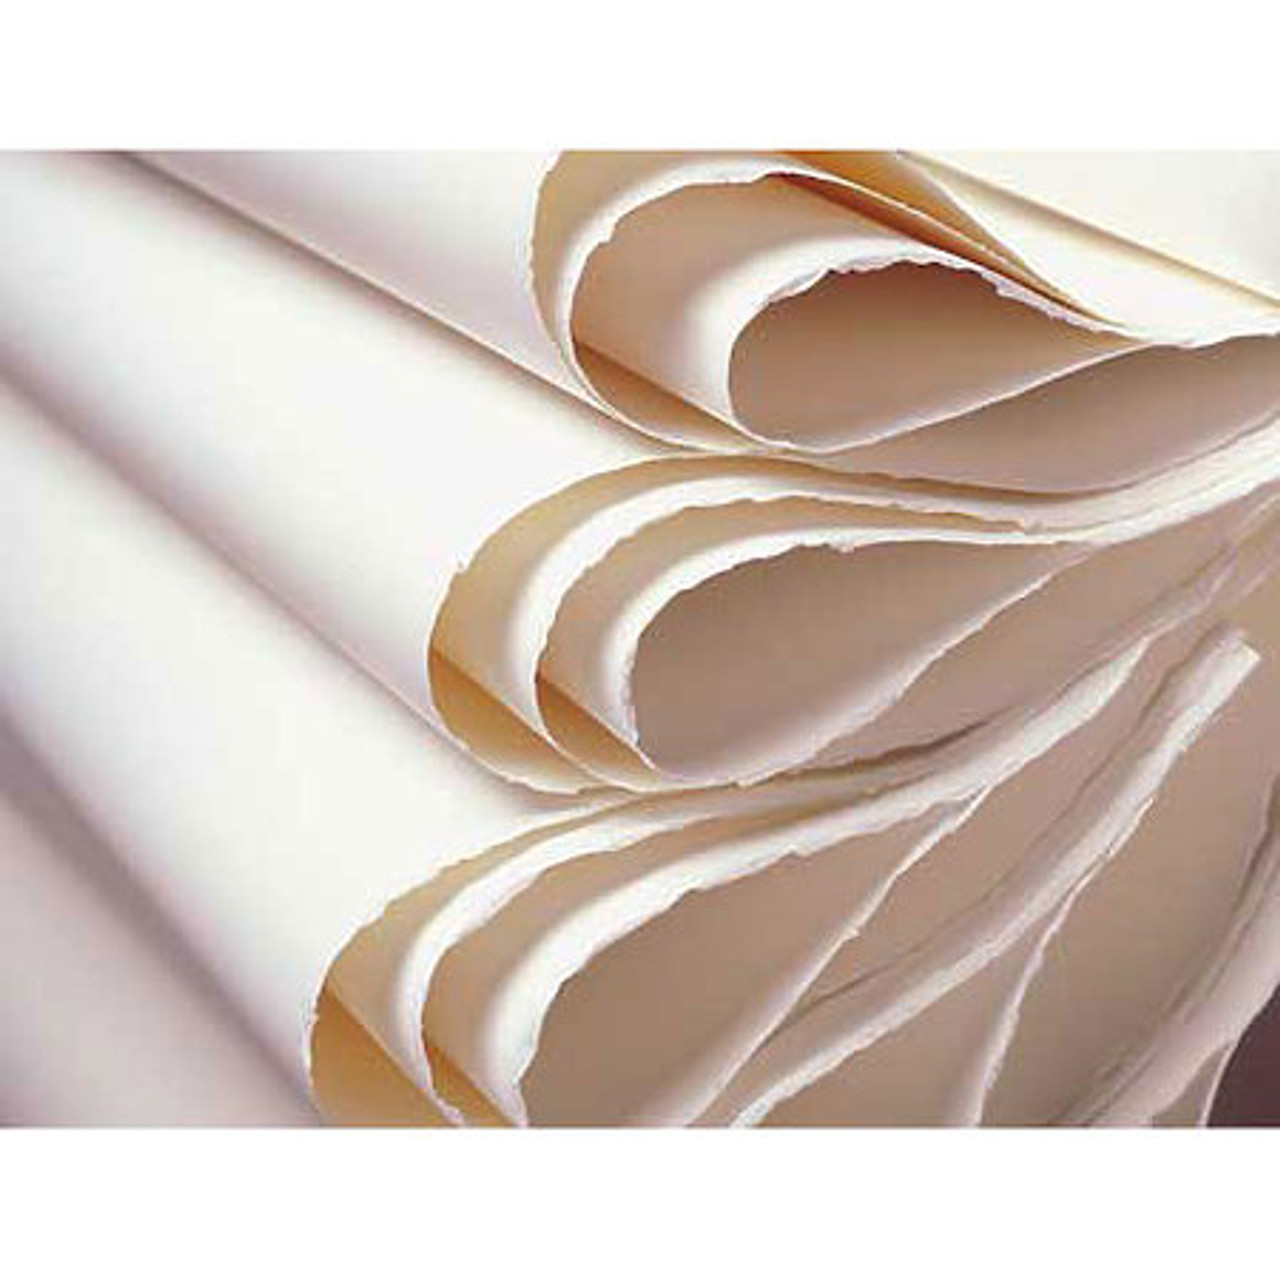 Fabriano Artistico Extra White Watercolor Paper 140lb Soft Press 22X30  Sheet - Wet Paint Artists' Materials and Framing